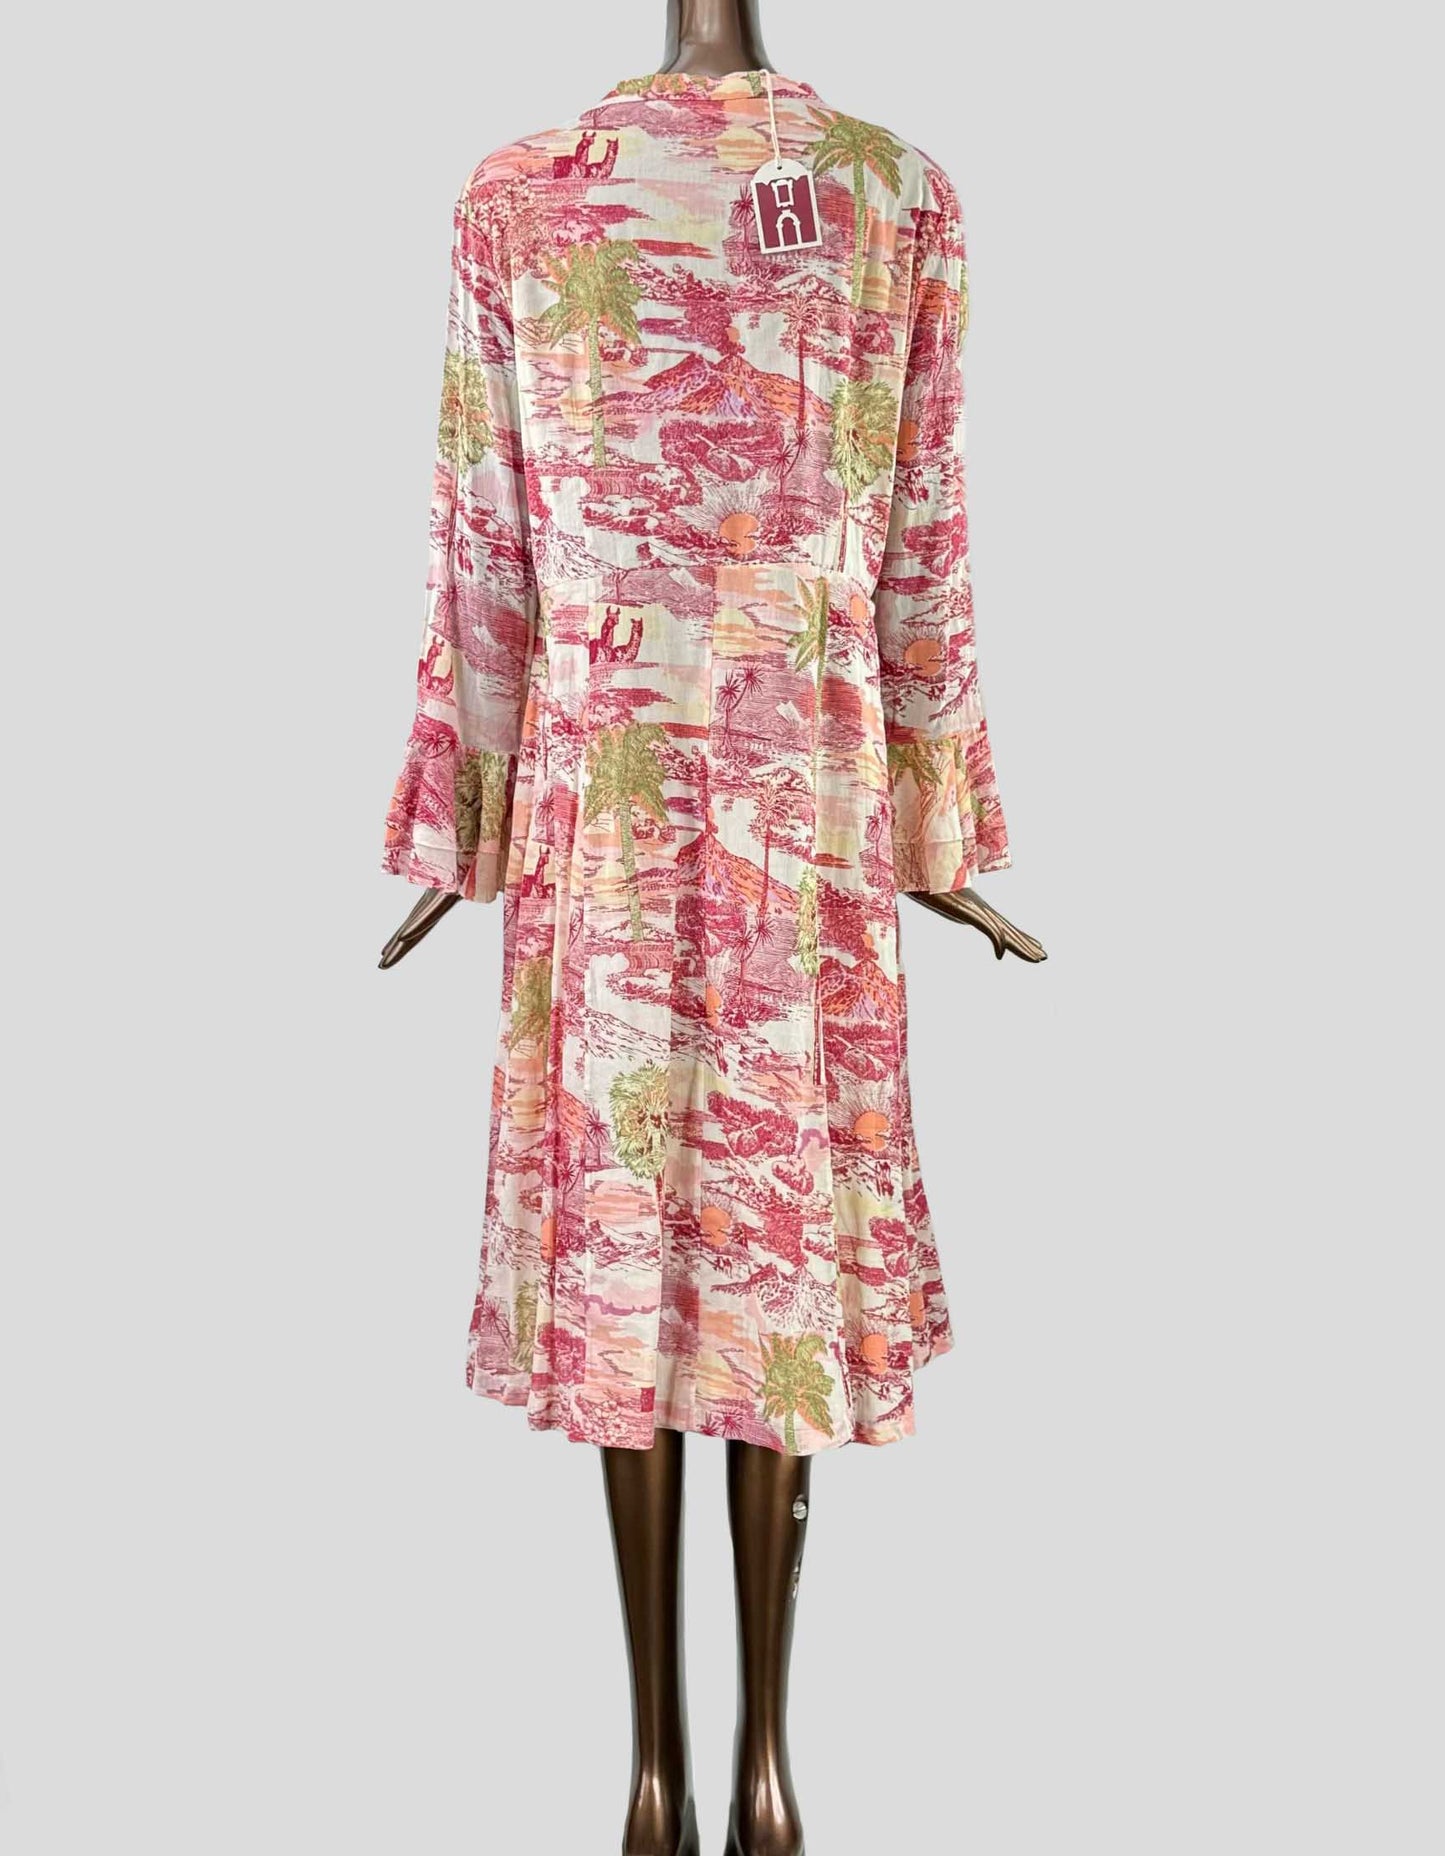 EMPORIO SIRENEUSE Floral Print Long Dress w/ Tags - 48 IT | 12 US